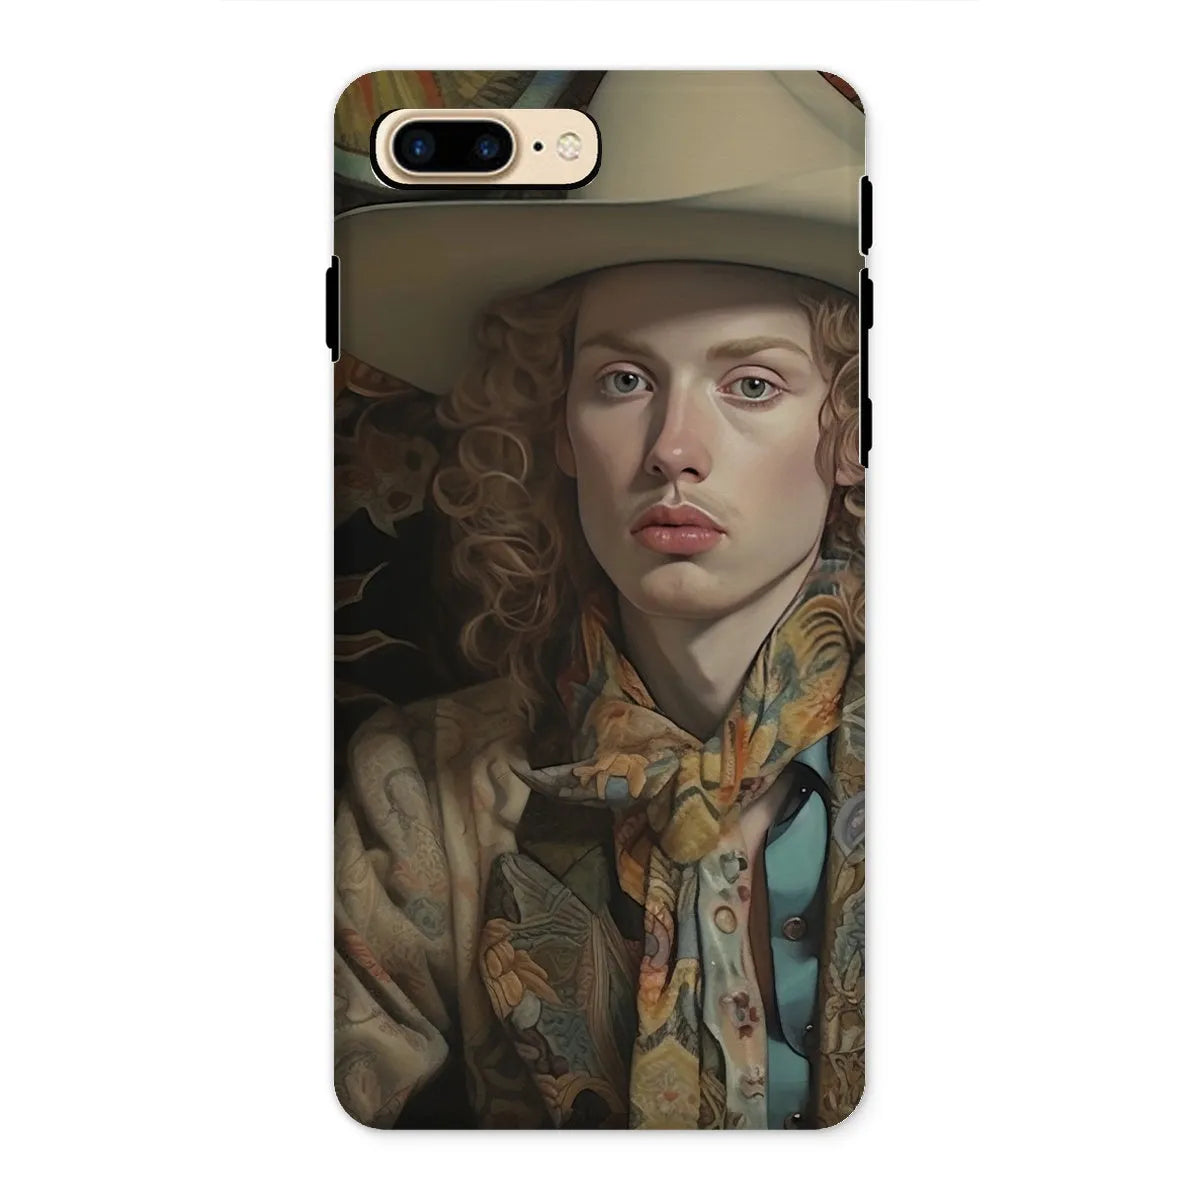 Ollie The Transgender Cowboy - F2m Dandy Outlaw Phone Case - Iphone 8 Plus / Matte - Mobile Phone Cases - Aesthetic Art